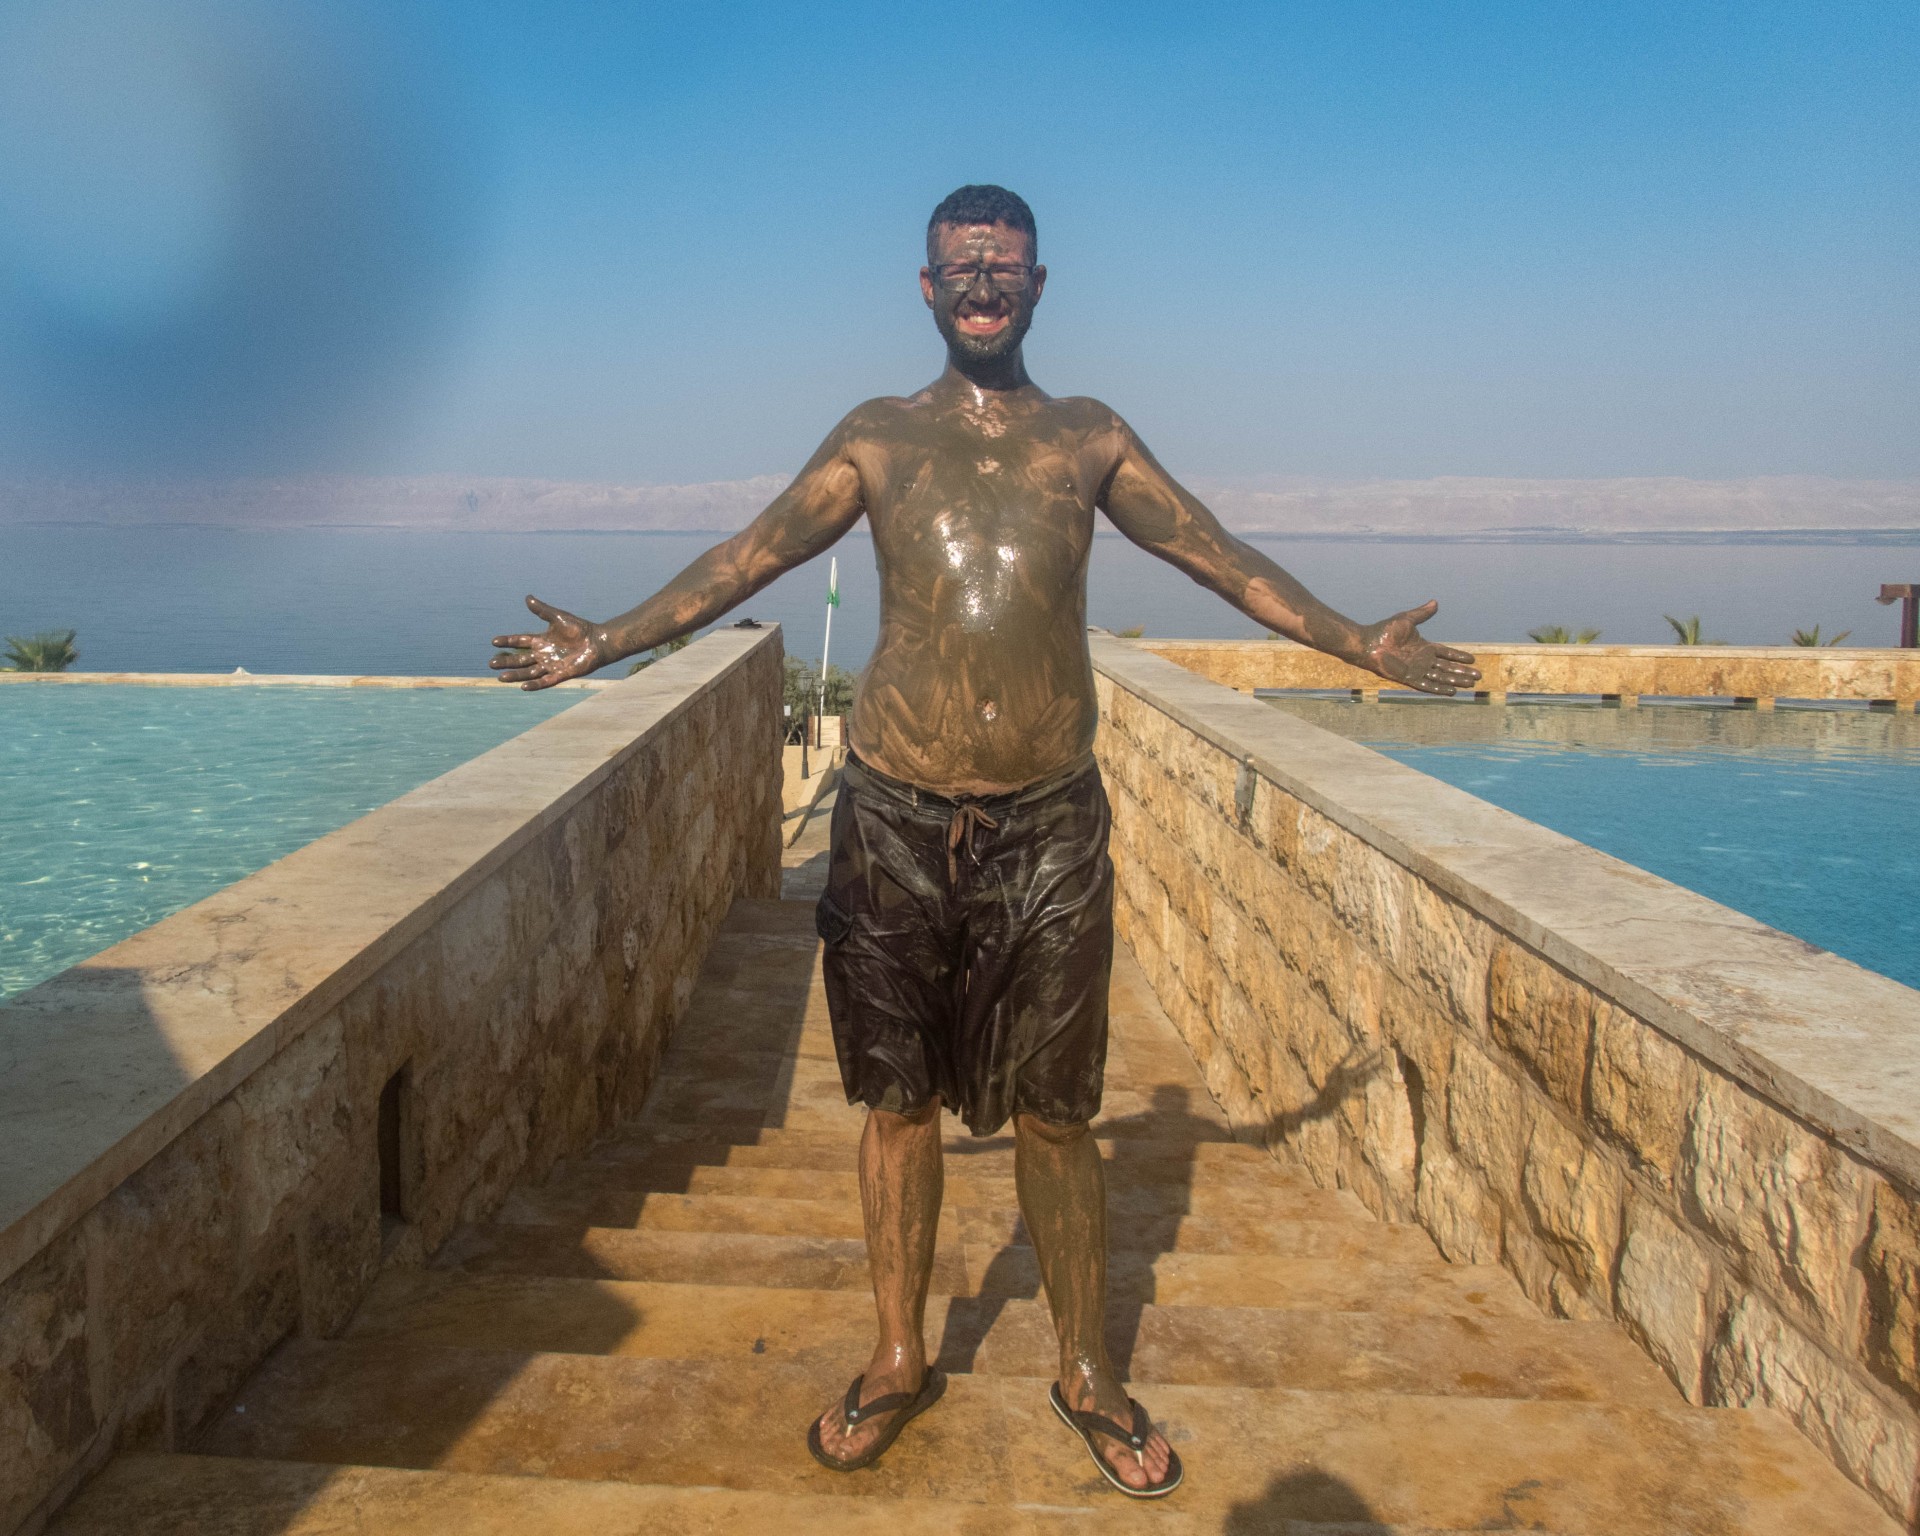 Smiling man covered in mud holds his arms out in front of the Dead Sea at the Kempisnki Hotel